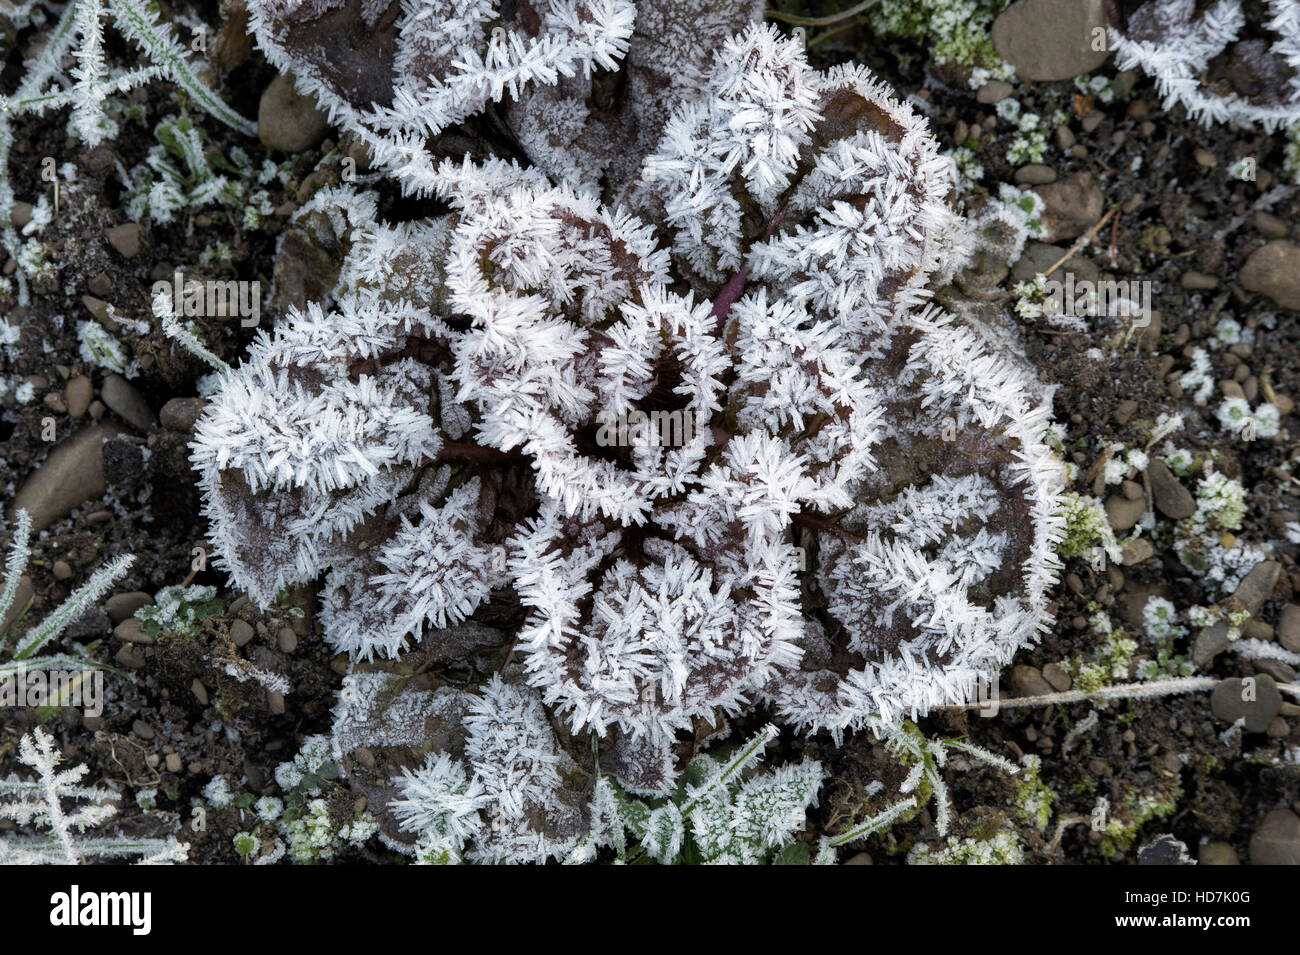 Winter Salad plants covered in frost. Scotland Stock Photo